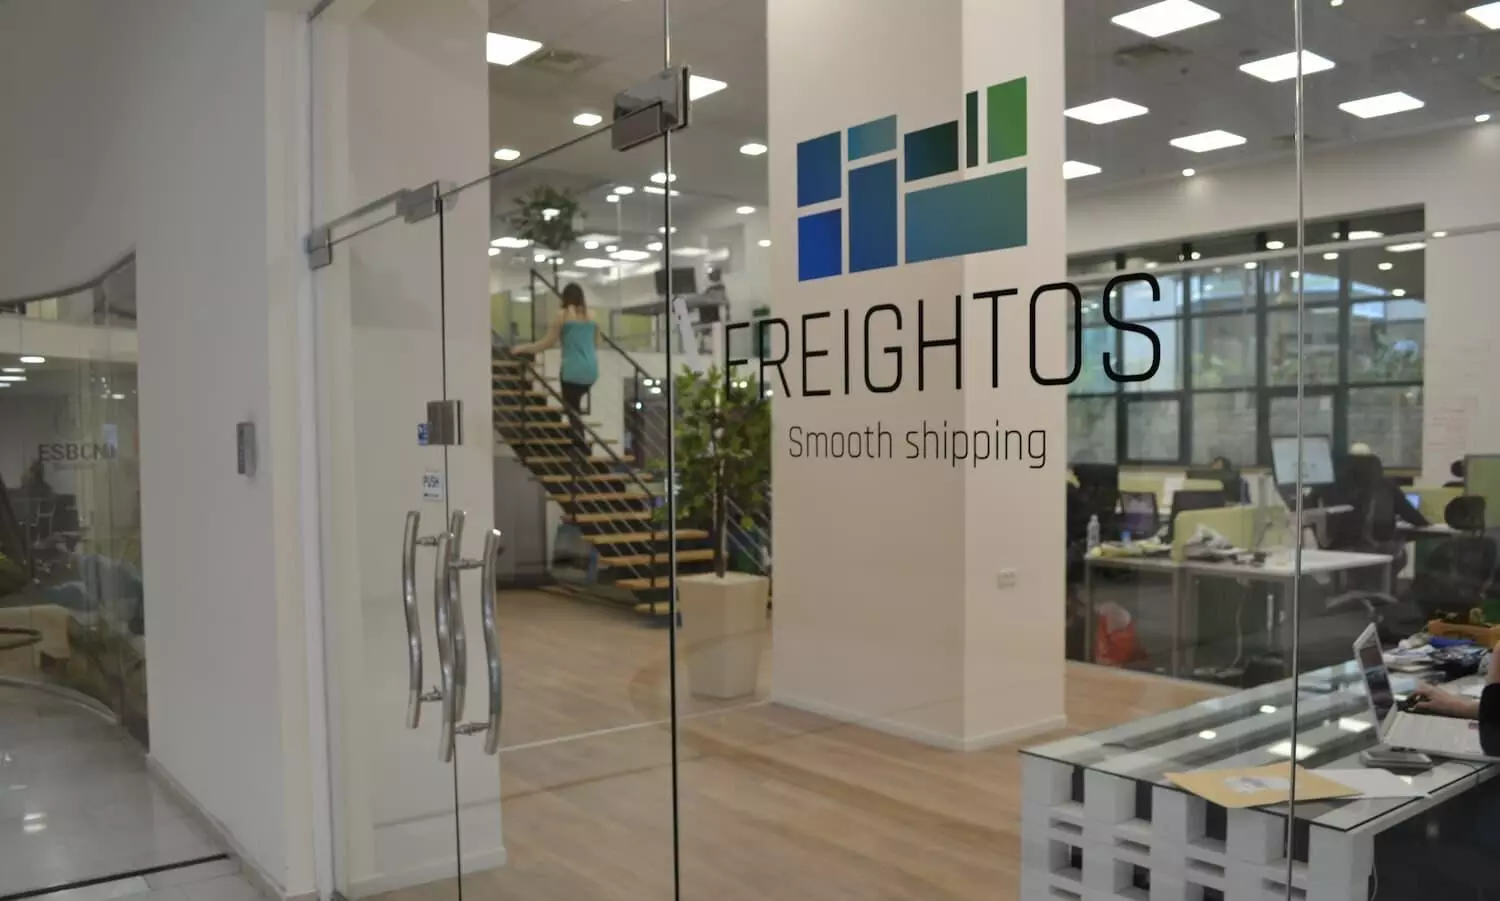 Freightos Terminal launches with market intelligence data, insights